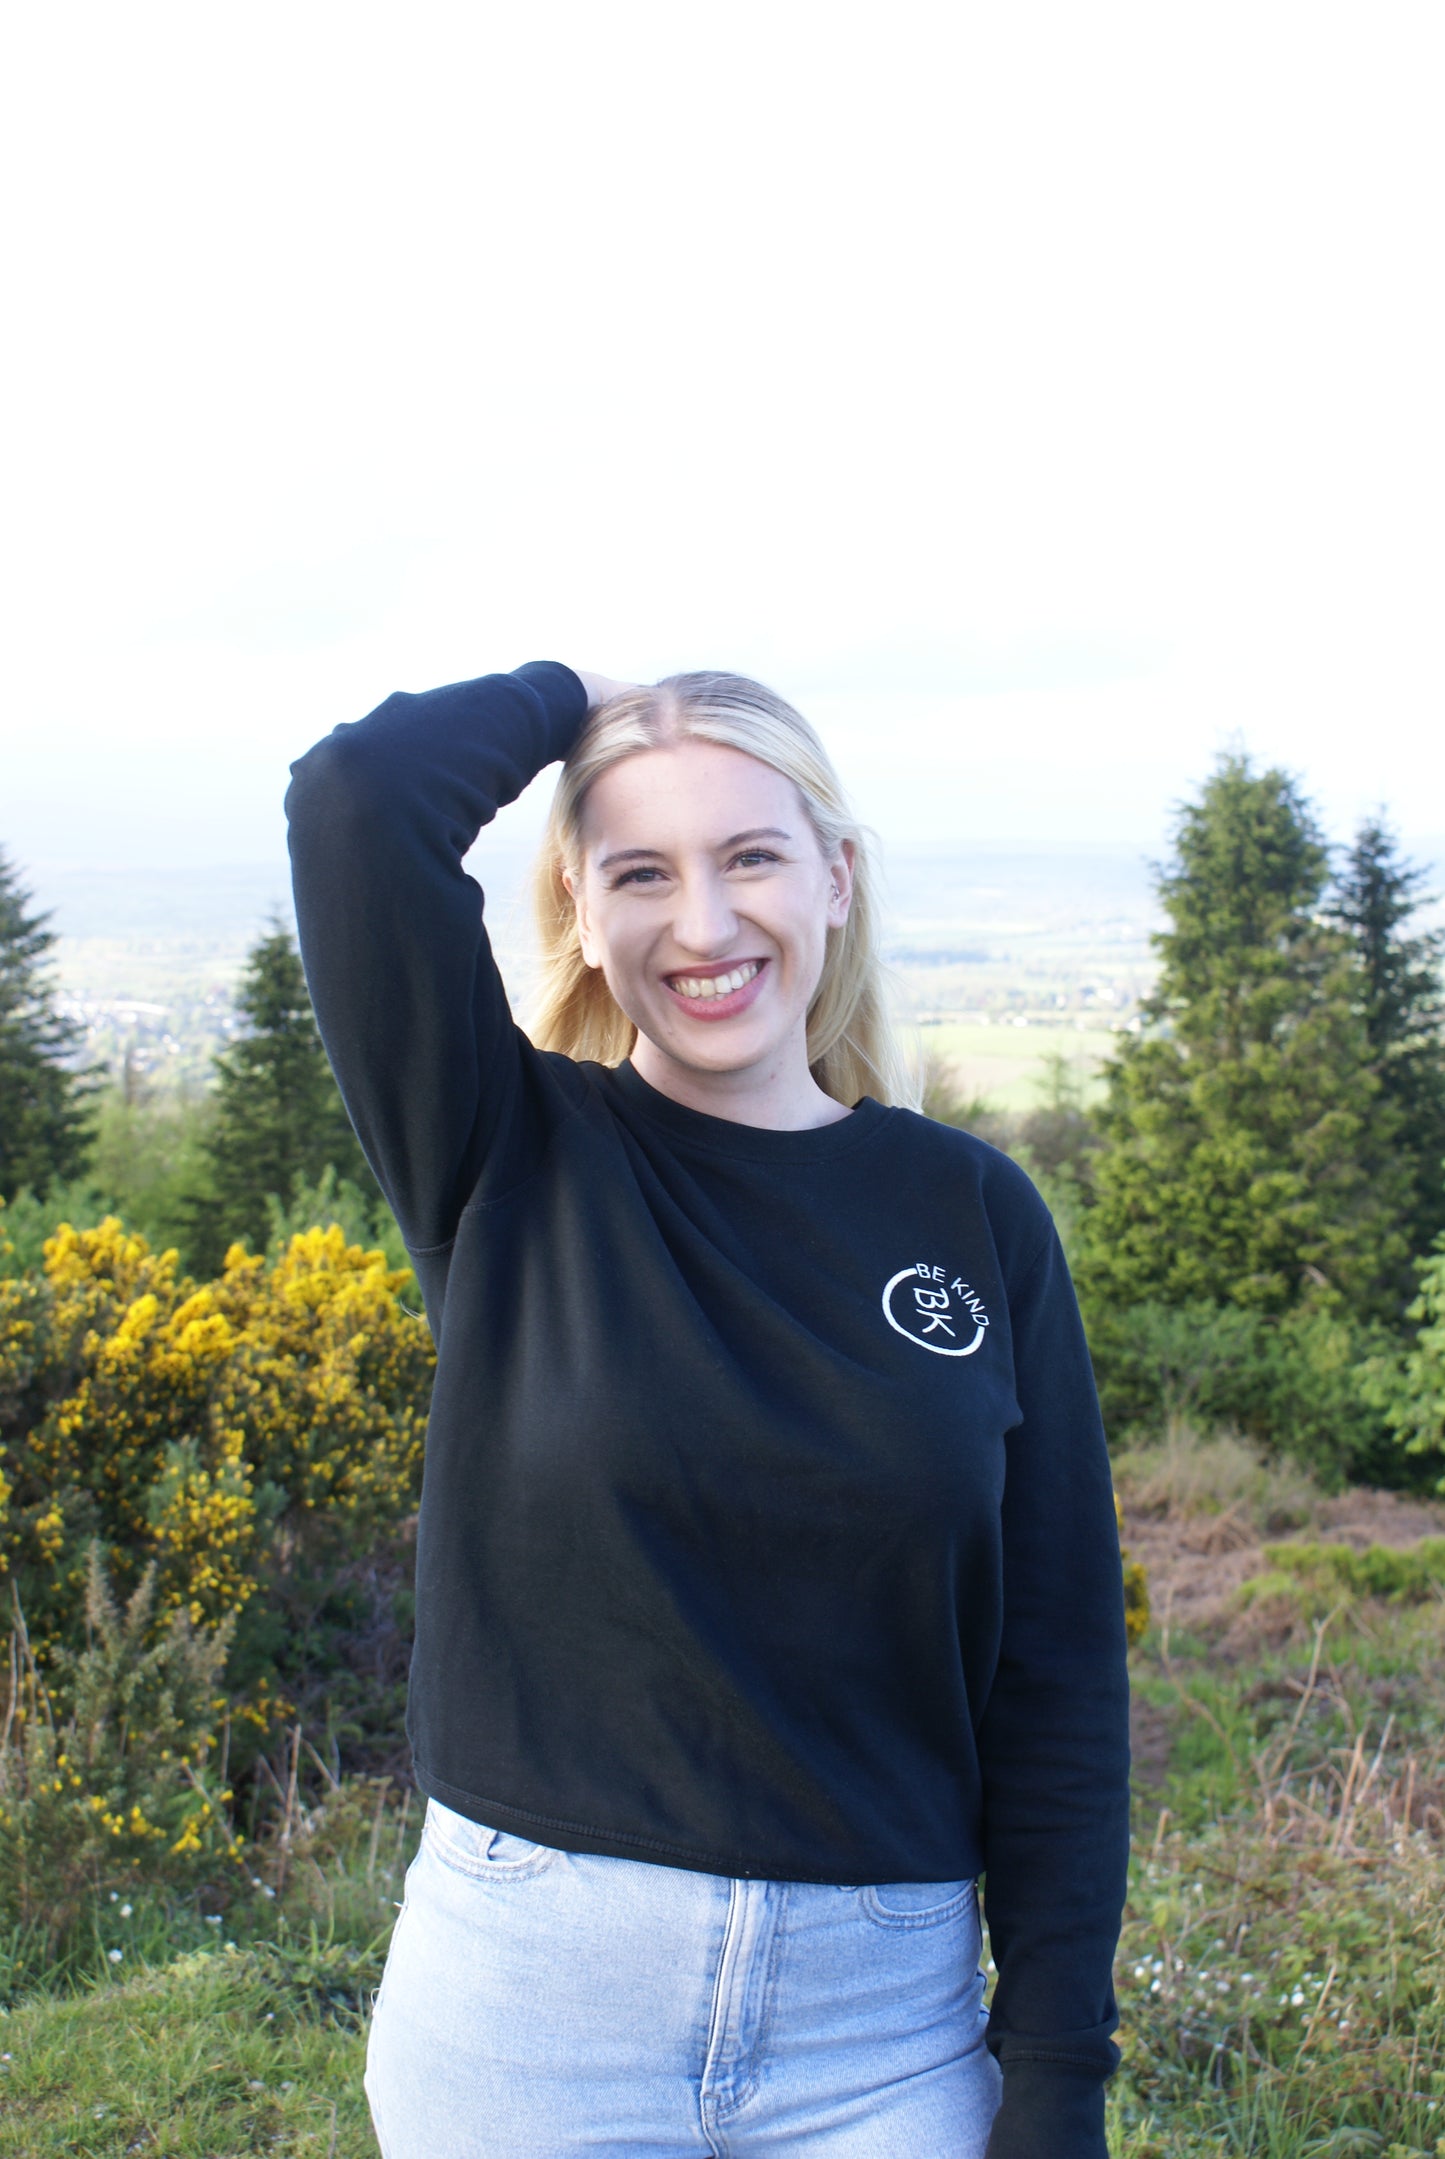 A woman smiles to the camera, she's wearing a Black Organic Cotton Sweatshirt from the Be Kind Apparel Original Collection